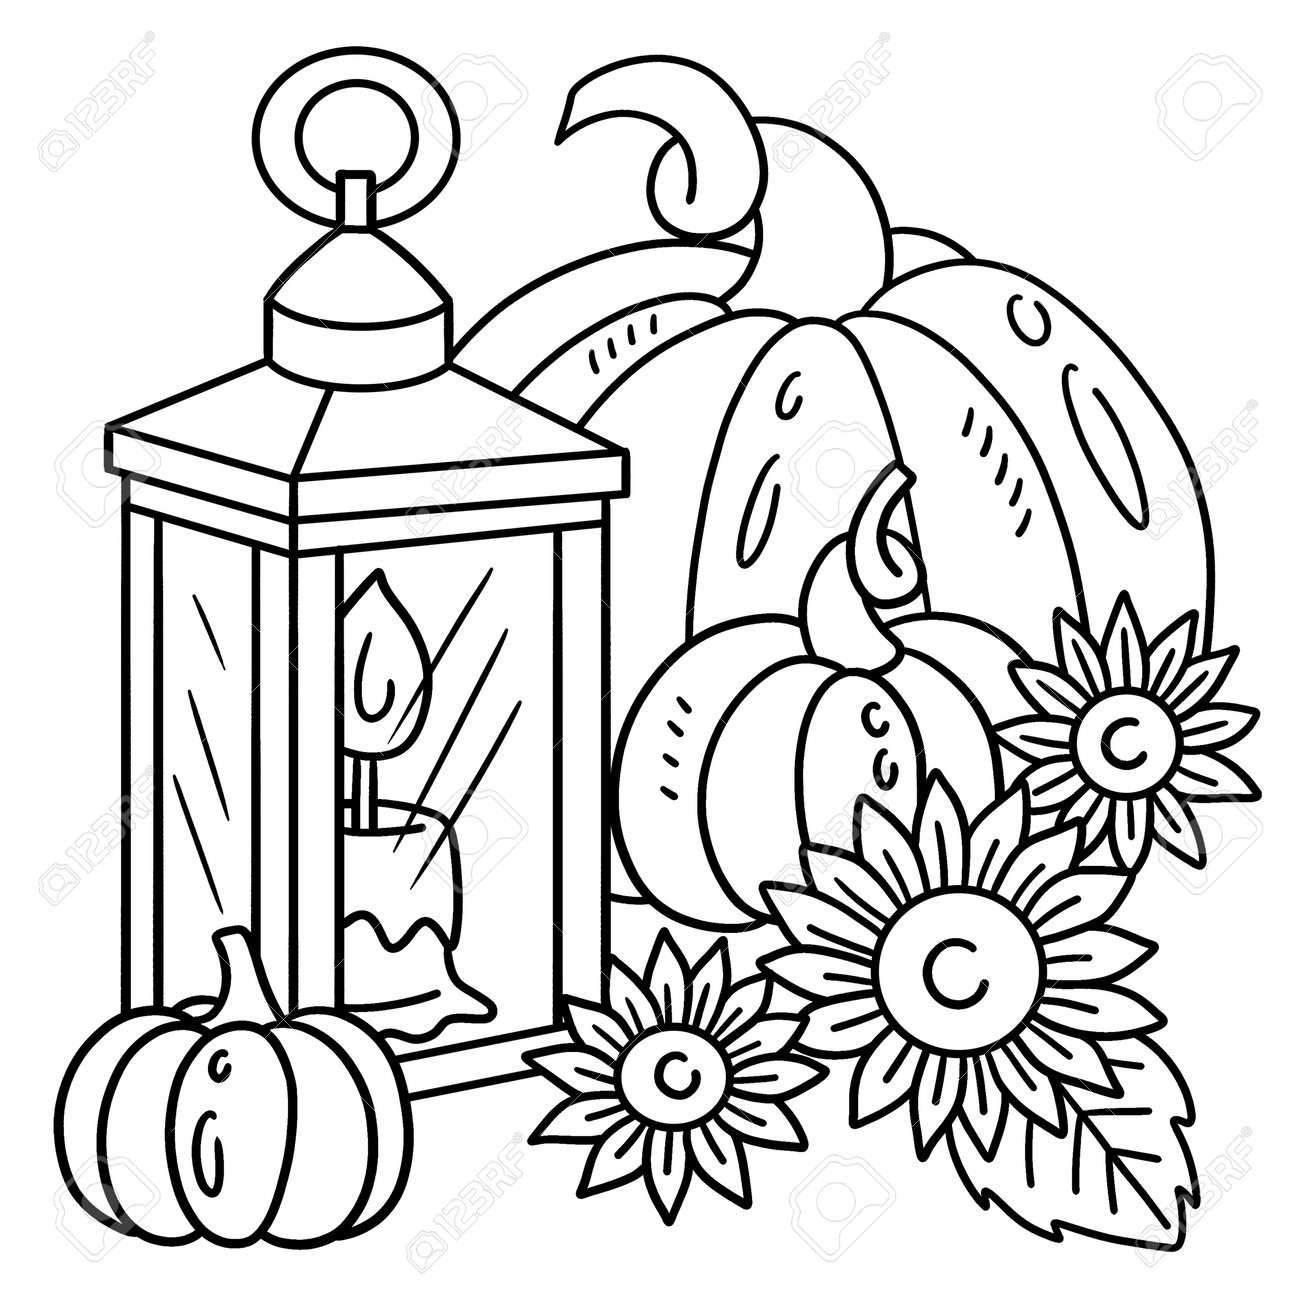 Thanksgiving pumpkin and lamp candle coloring page royalty free svg cliparts vectors and stock illustration image